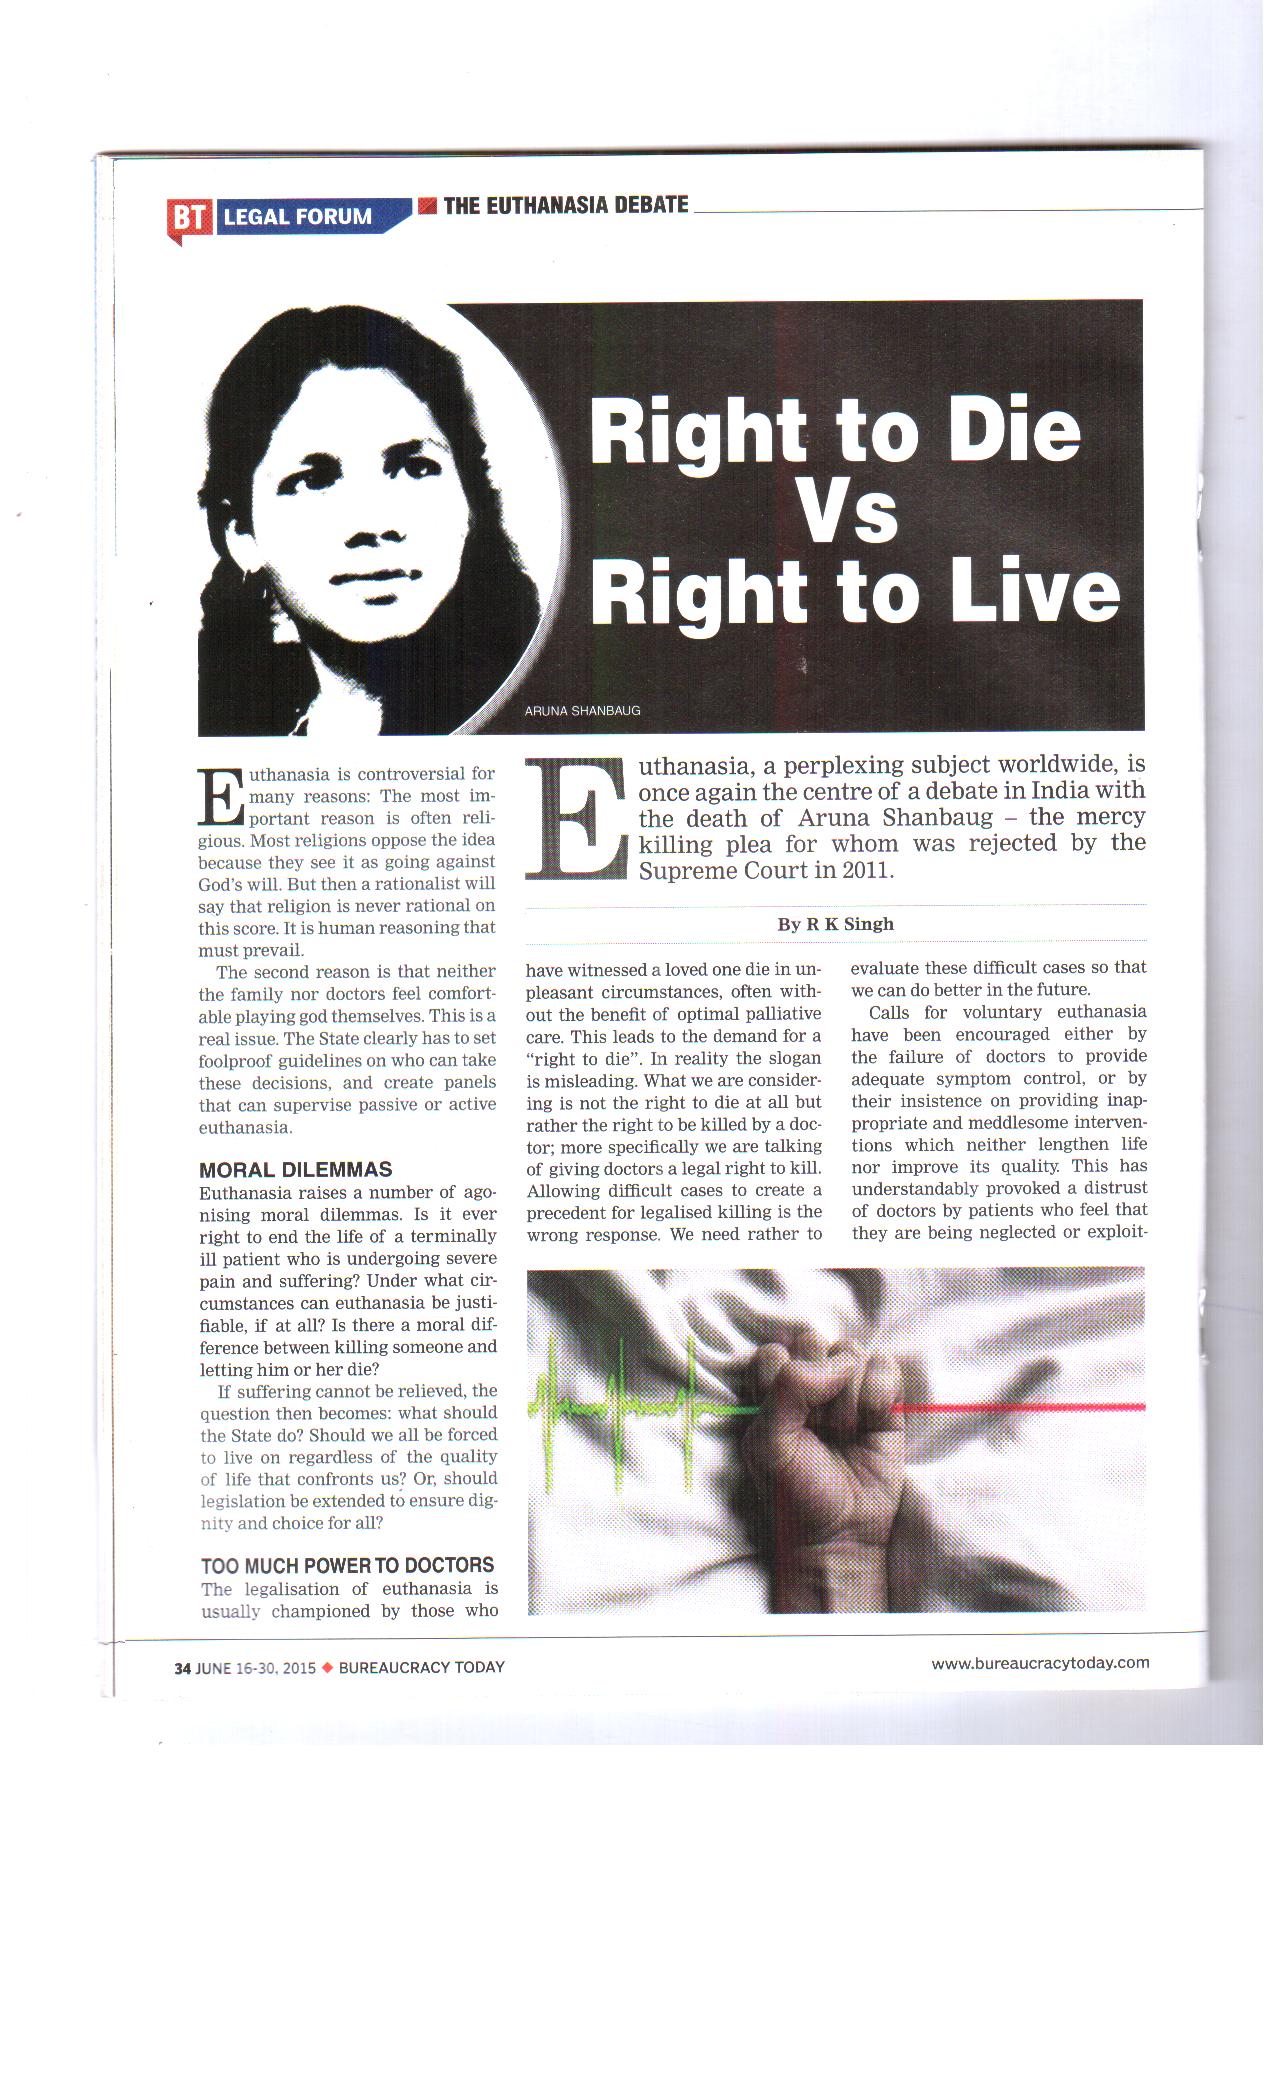 Right to Die vs Right to Live